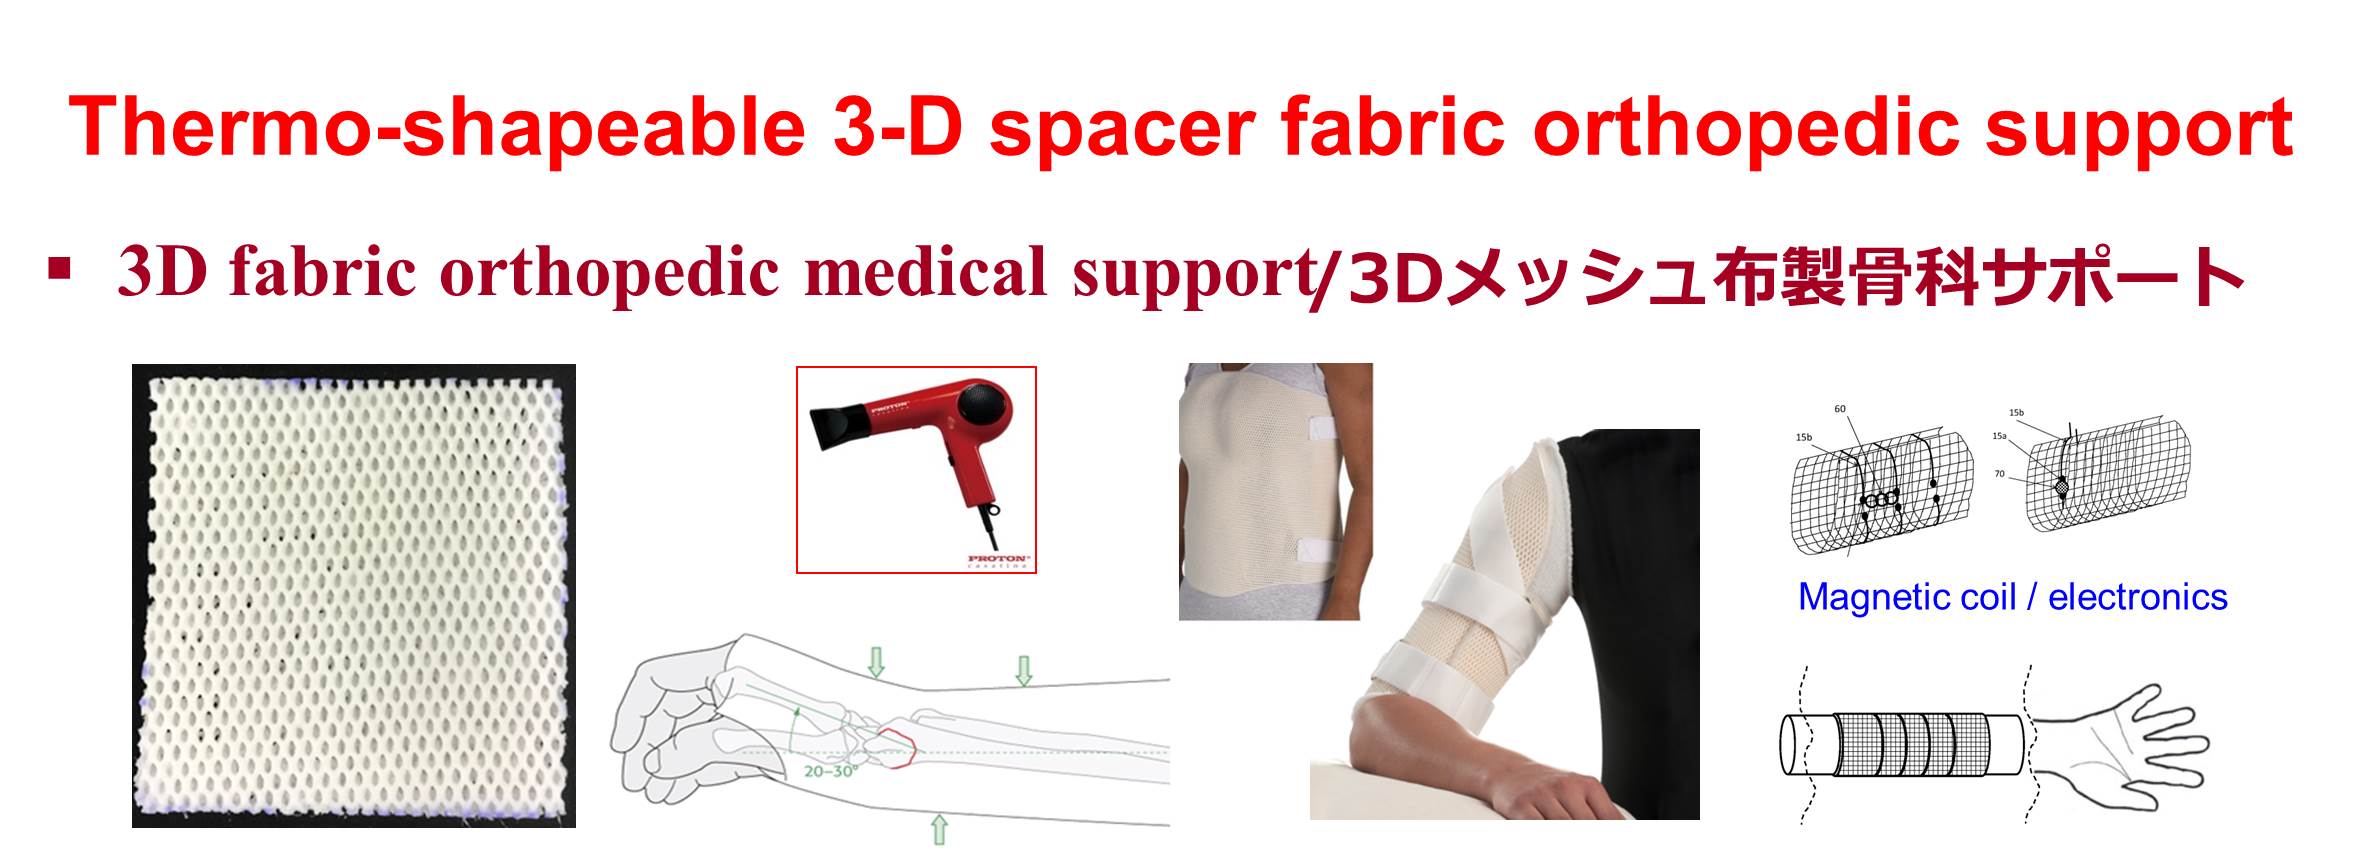 Thermo-shapeable  spacer fabric  for orthopedic support